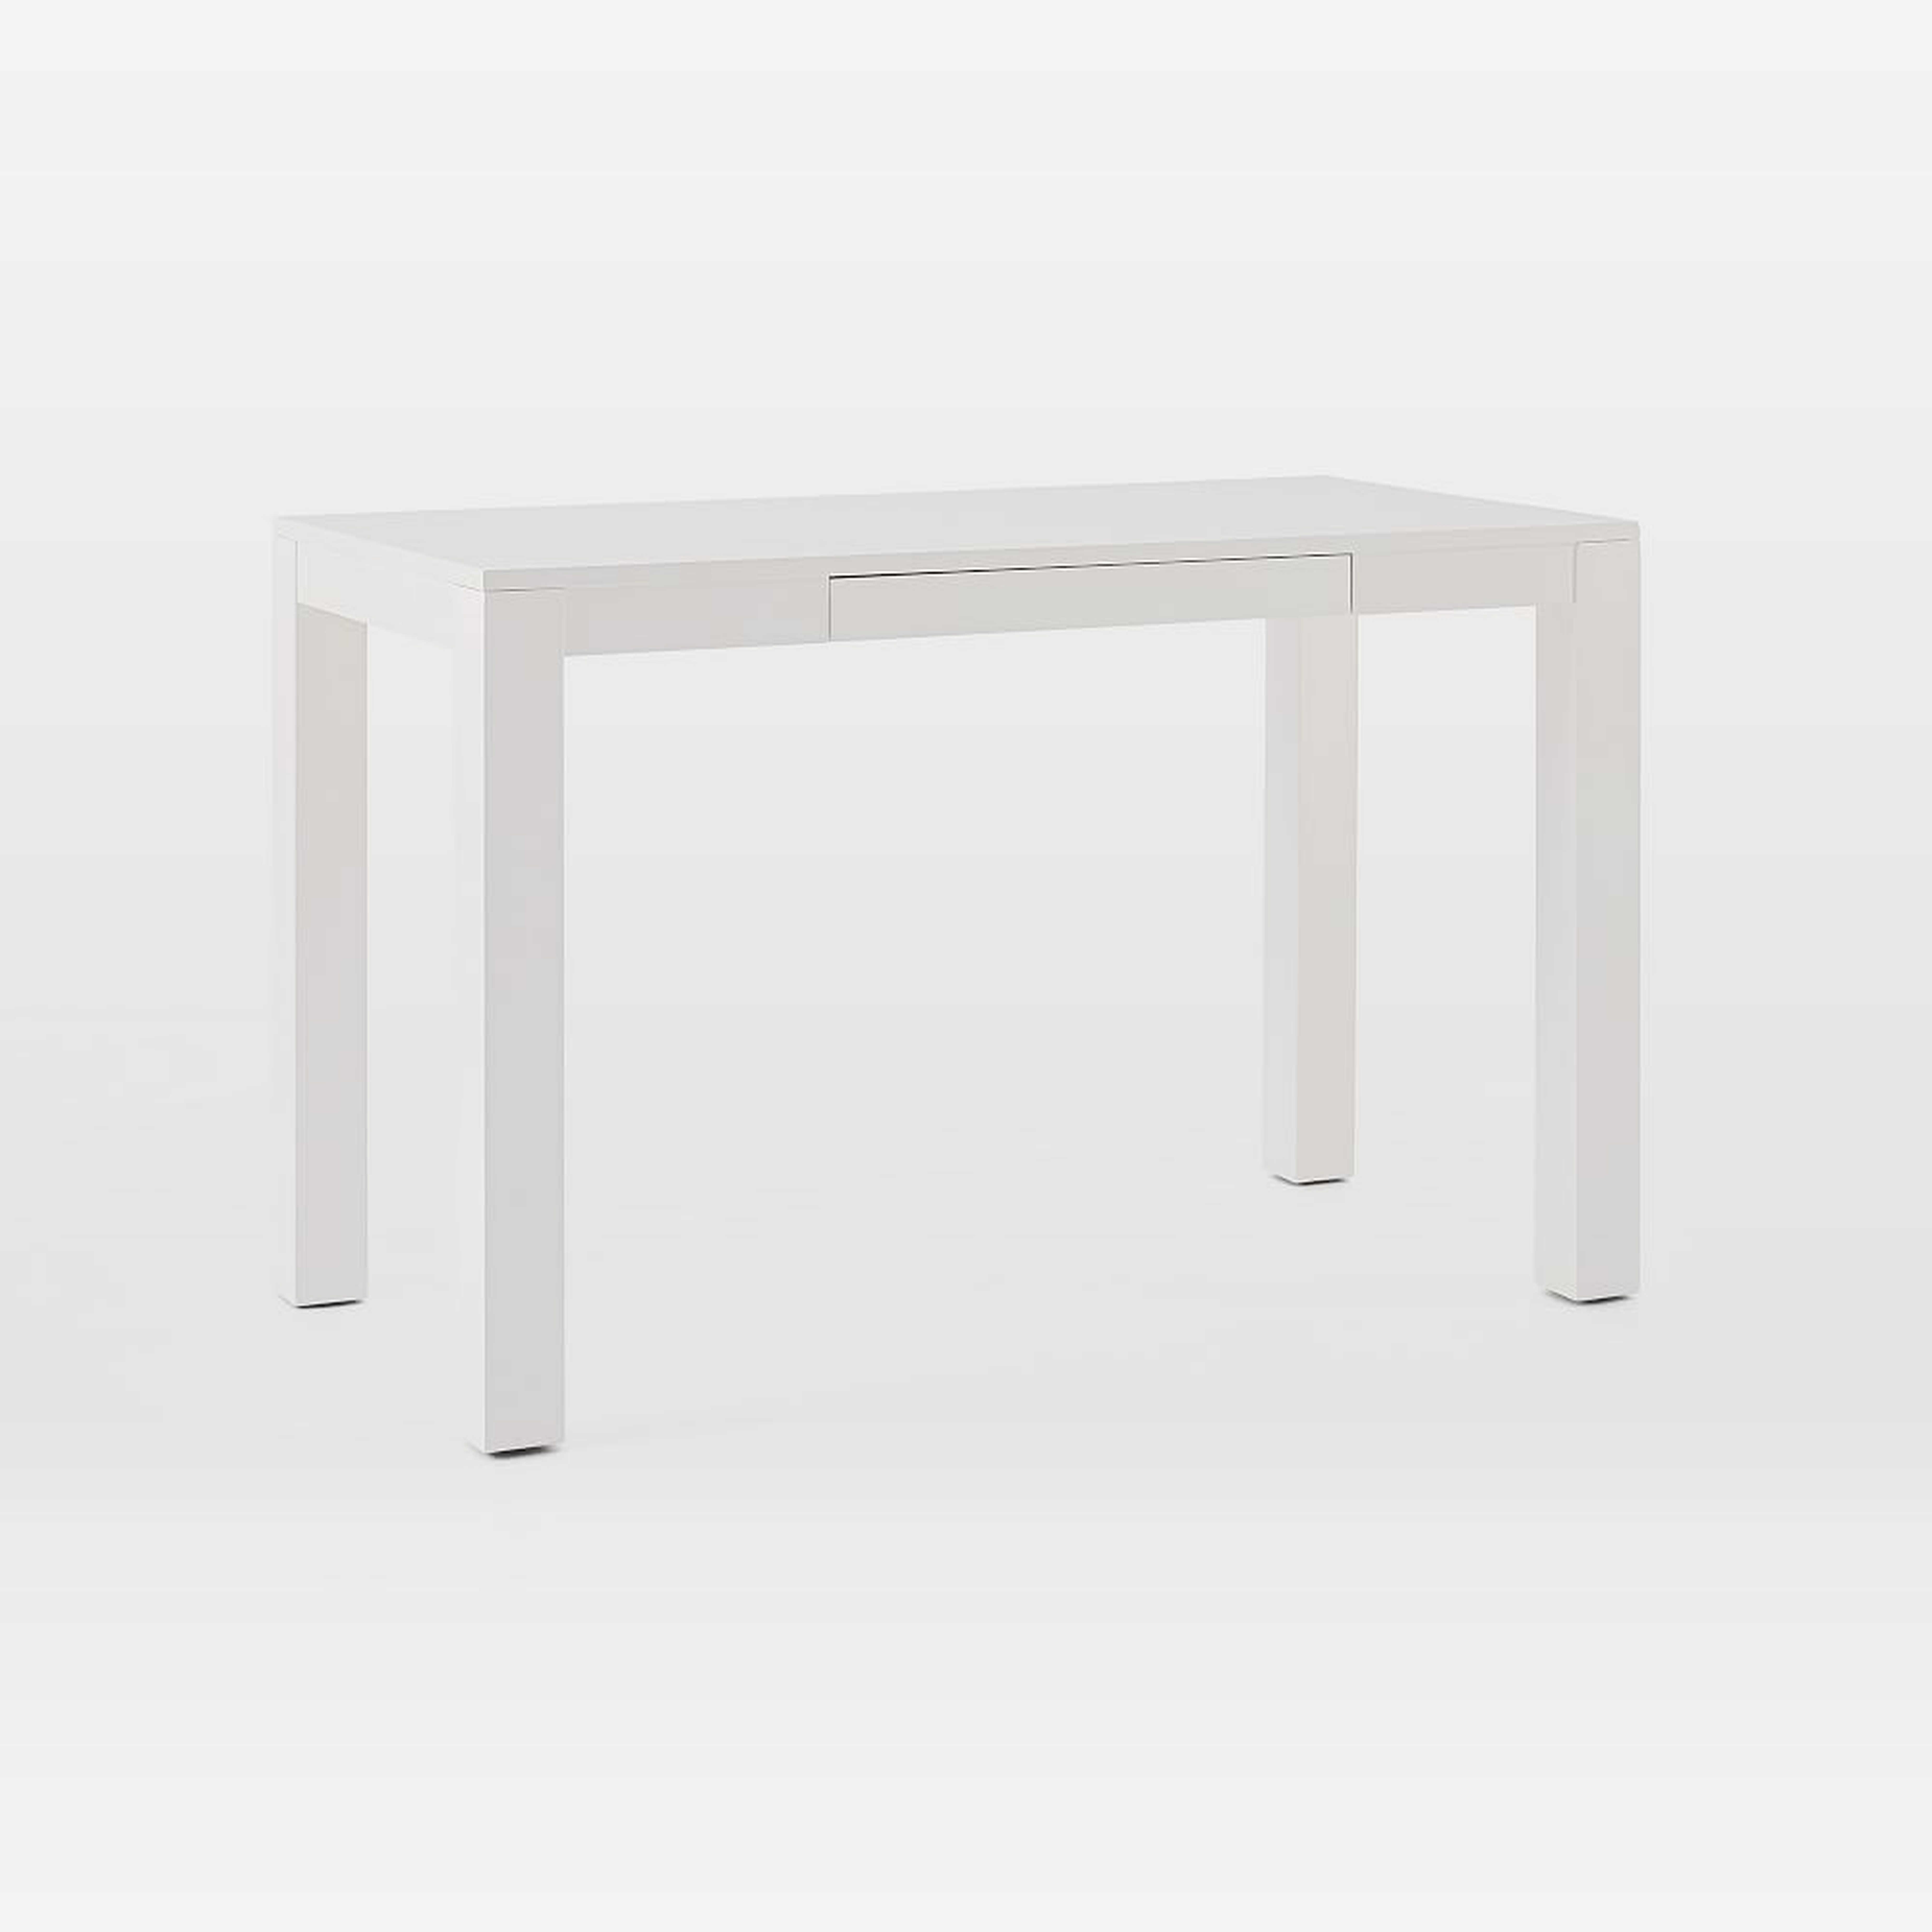 Parsons Desk With Drawers, White - West Elm